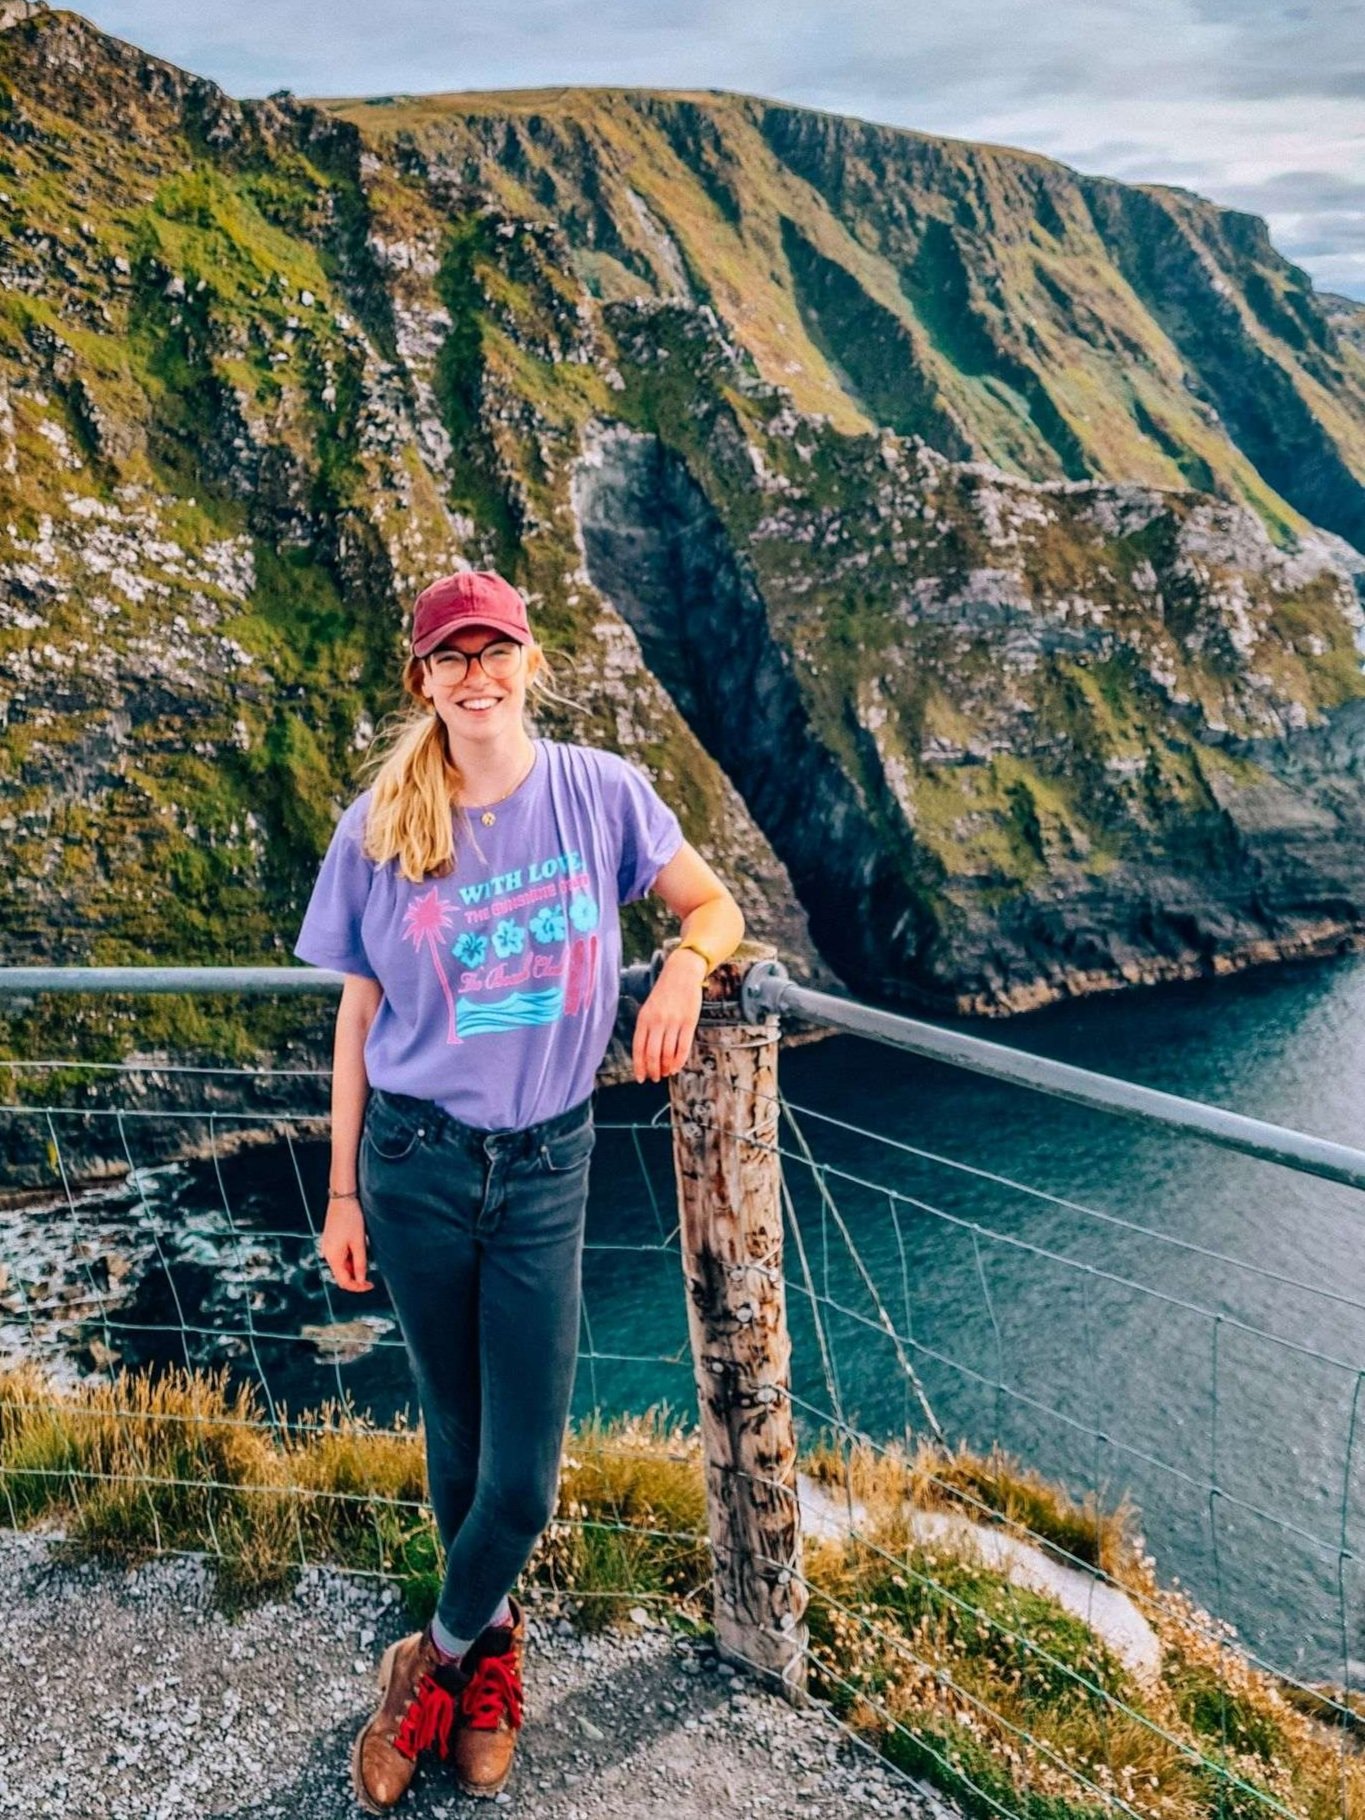 Hey, I’m Helena - I’m a travel blogger from the UK who got tired of being told I needed to work my whole life and wait to see the world when I retire.I truly believe that you can make travel work for you and your lifestyle. Travel isn’t just for those with a huge budget or an Instagram following. Travel doesn’t even have to mean getting on a plane.My aim has always been to show people it’s possible to travel solo, to travel on a budget and to travel with a full-time 9 to 5 job (because that’s exactly what I do).I hope this blog inspires you to make travel work for you. x